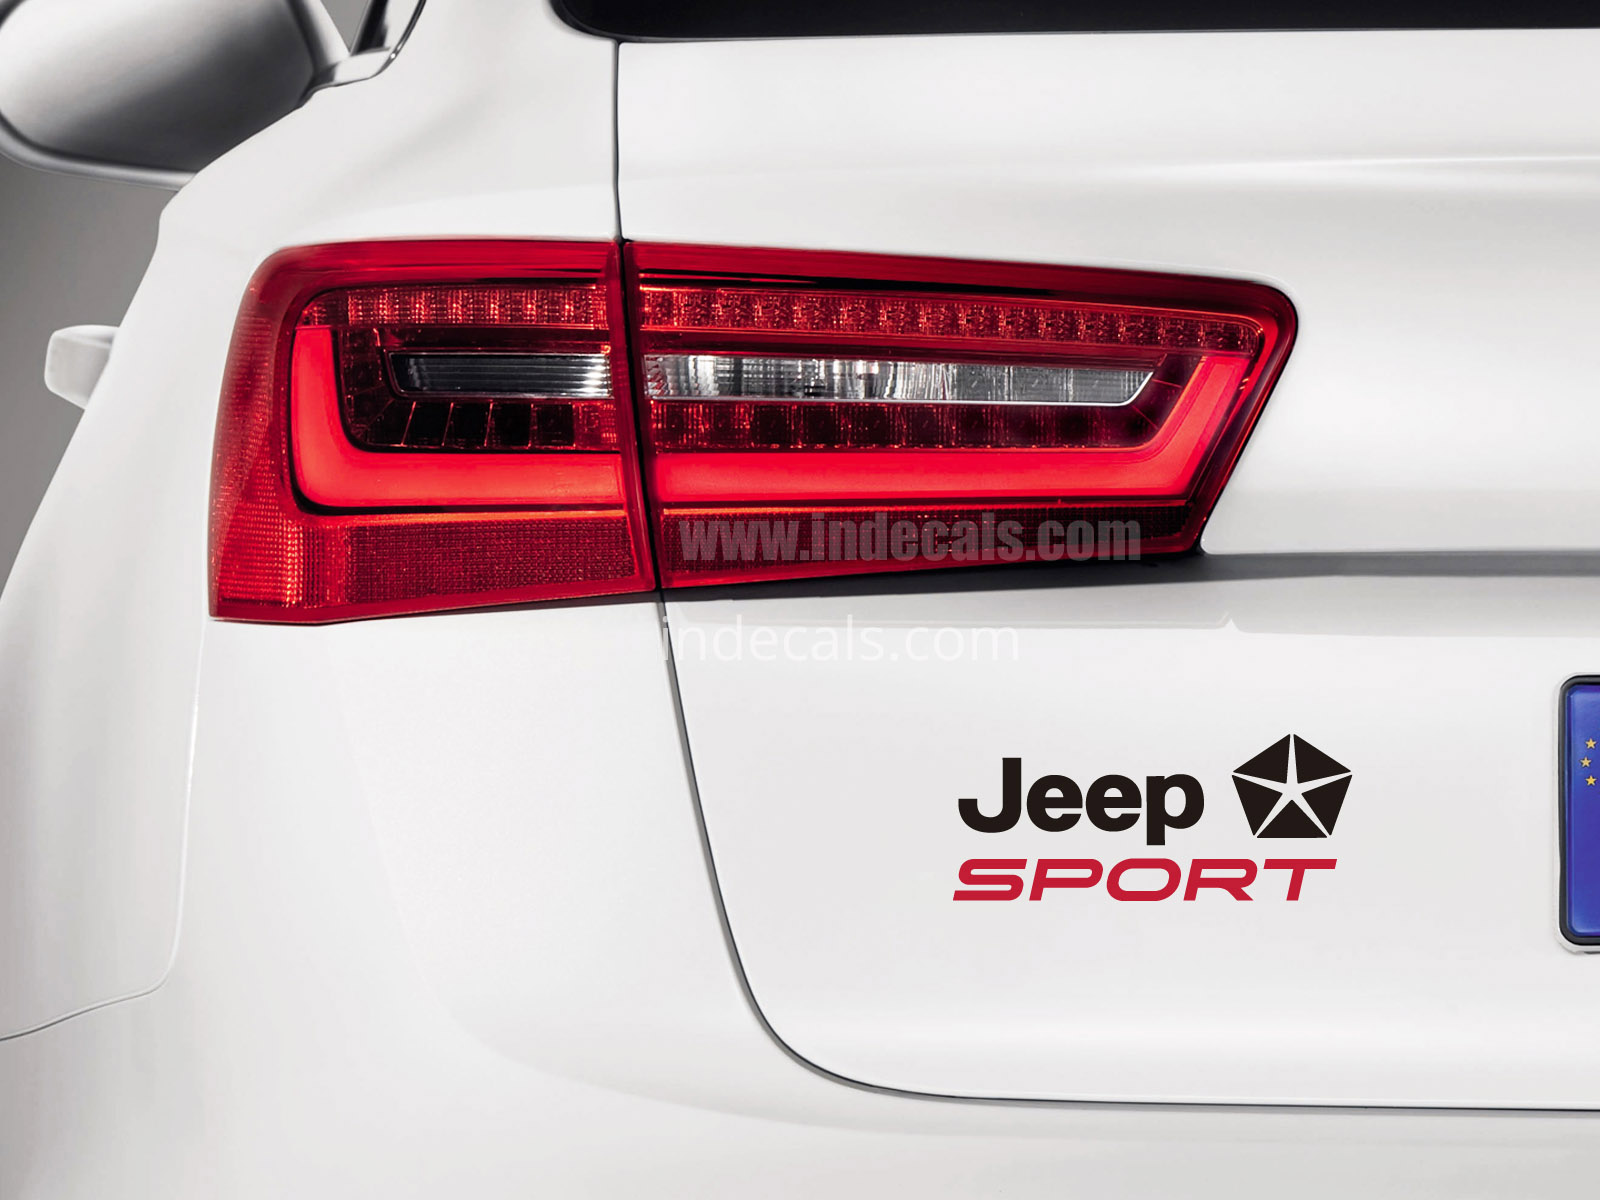 1 x Jeep Sports Sticker for Trunk - Black & Red